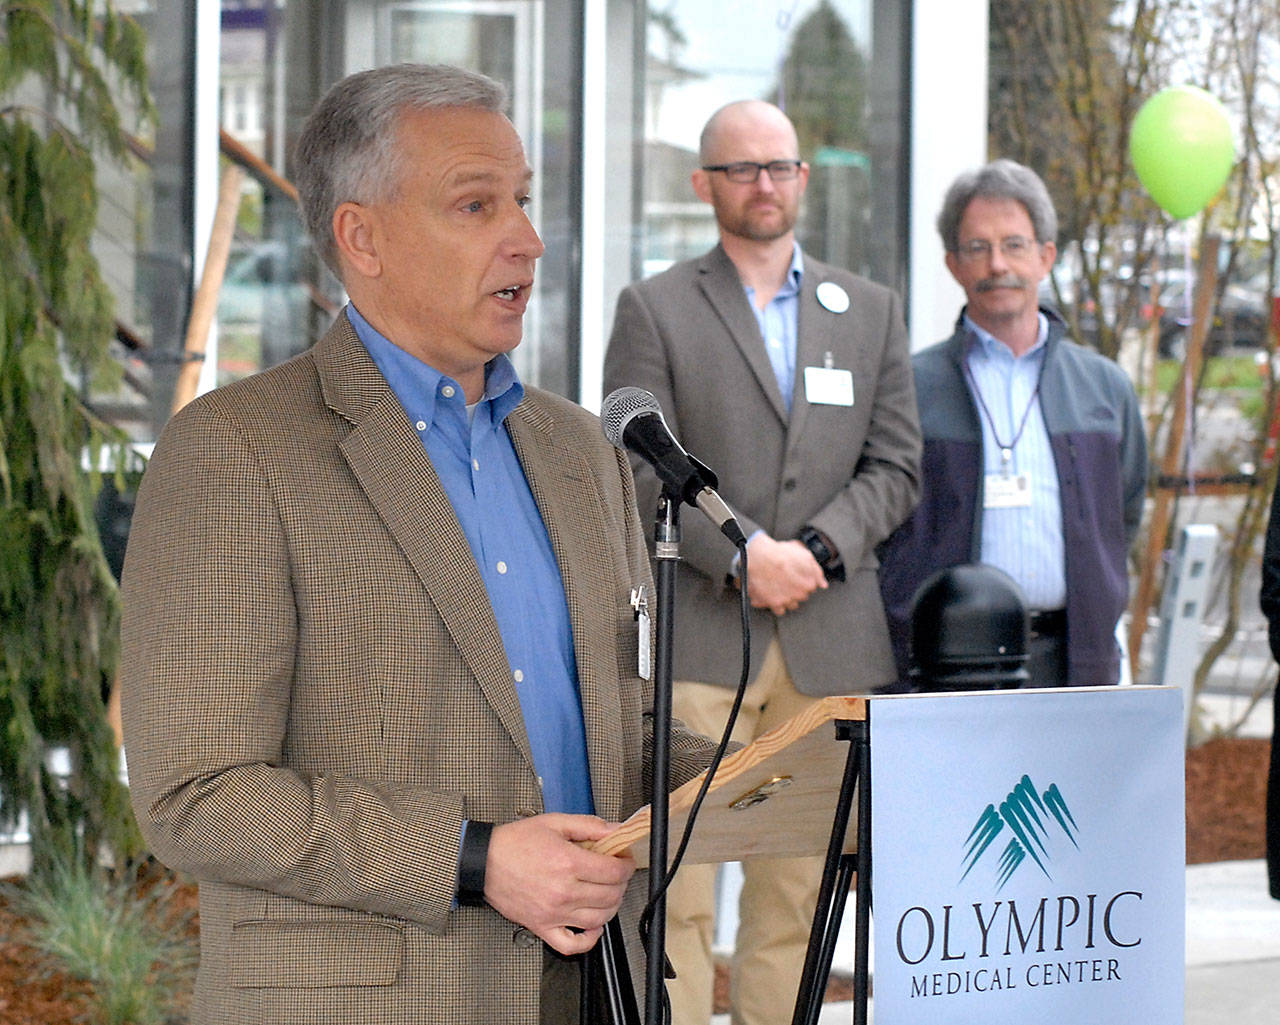 Olympic Medical Center CEO Eric Lewis, left, speaks during Saturday’s grand opening ceremony for a new medical office building constructed by OMC in Port Angeles. In the background are OMC chief physician officer Joshua Jones and and medical physician Bill Kintner. (Keith Thorpe/Peninsula Daily News)